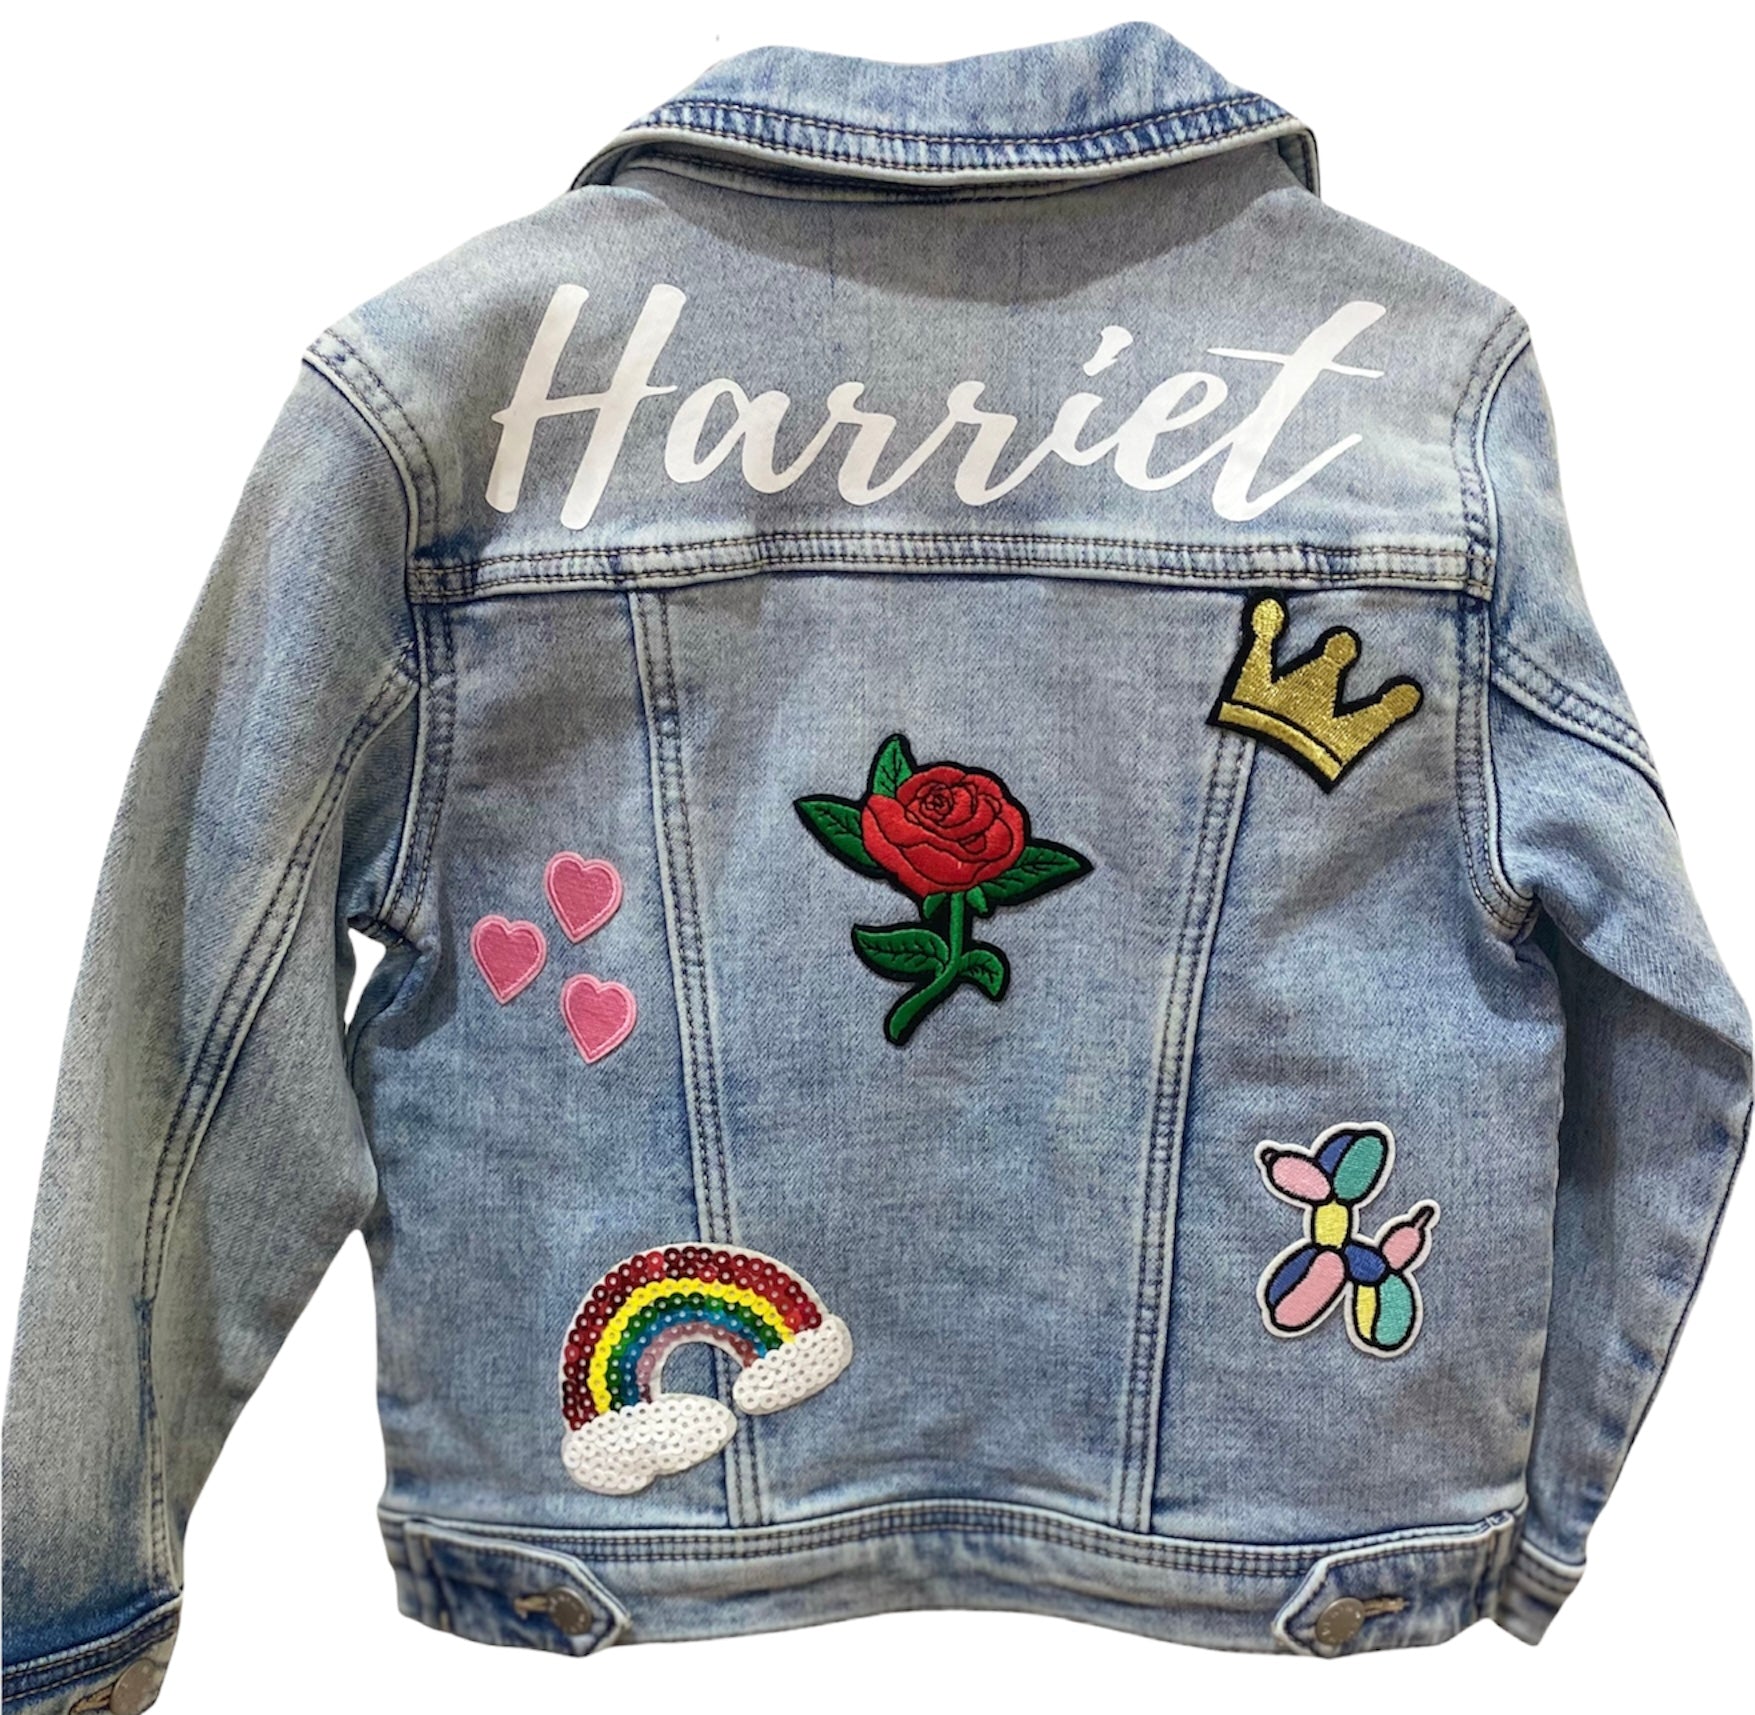 Custom Jackets - Embroidered Jackets With Logo